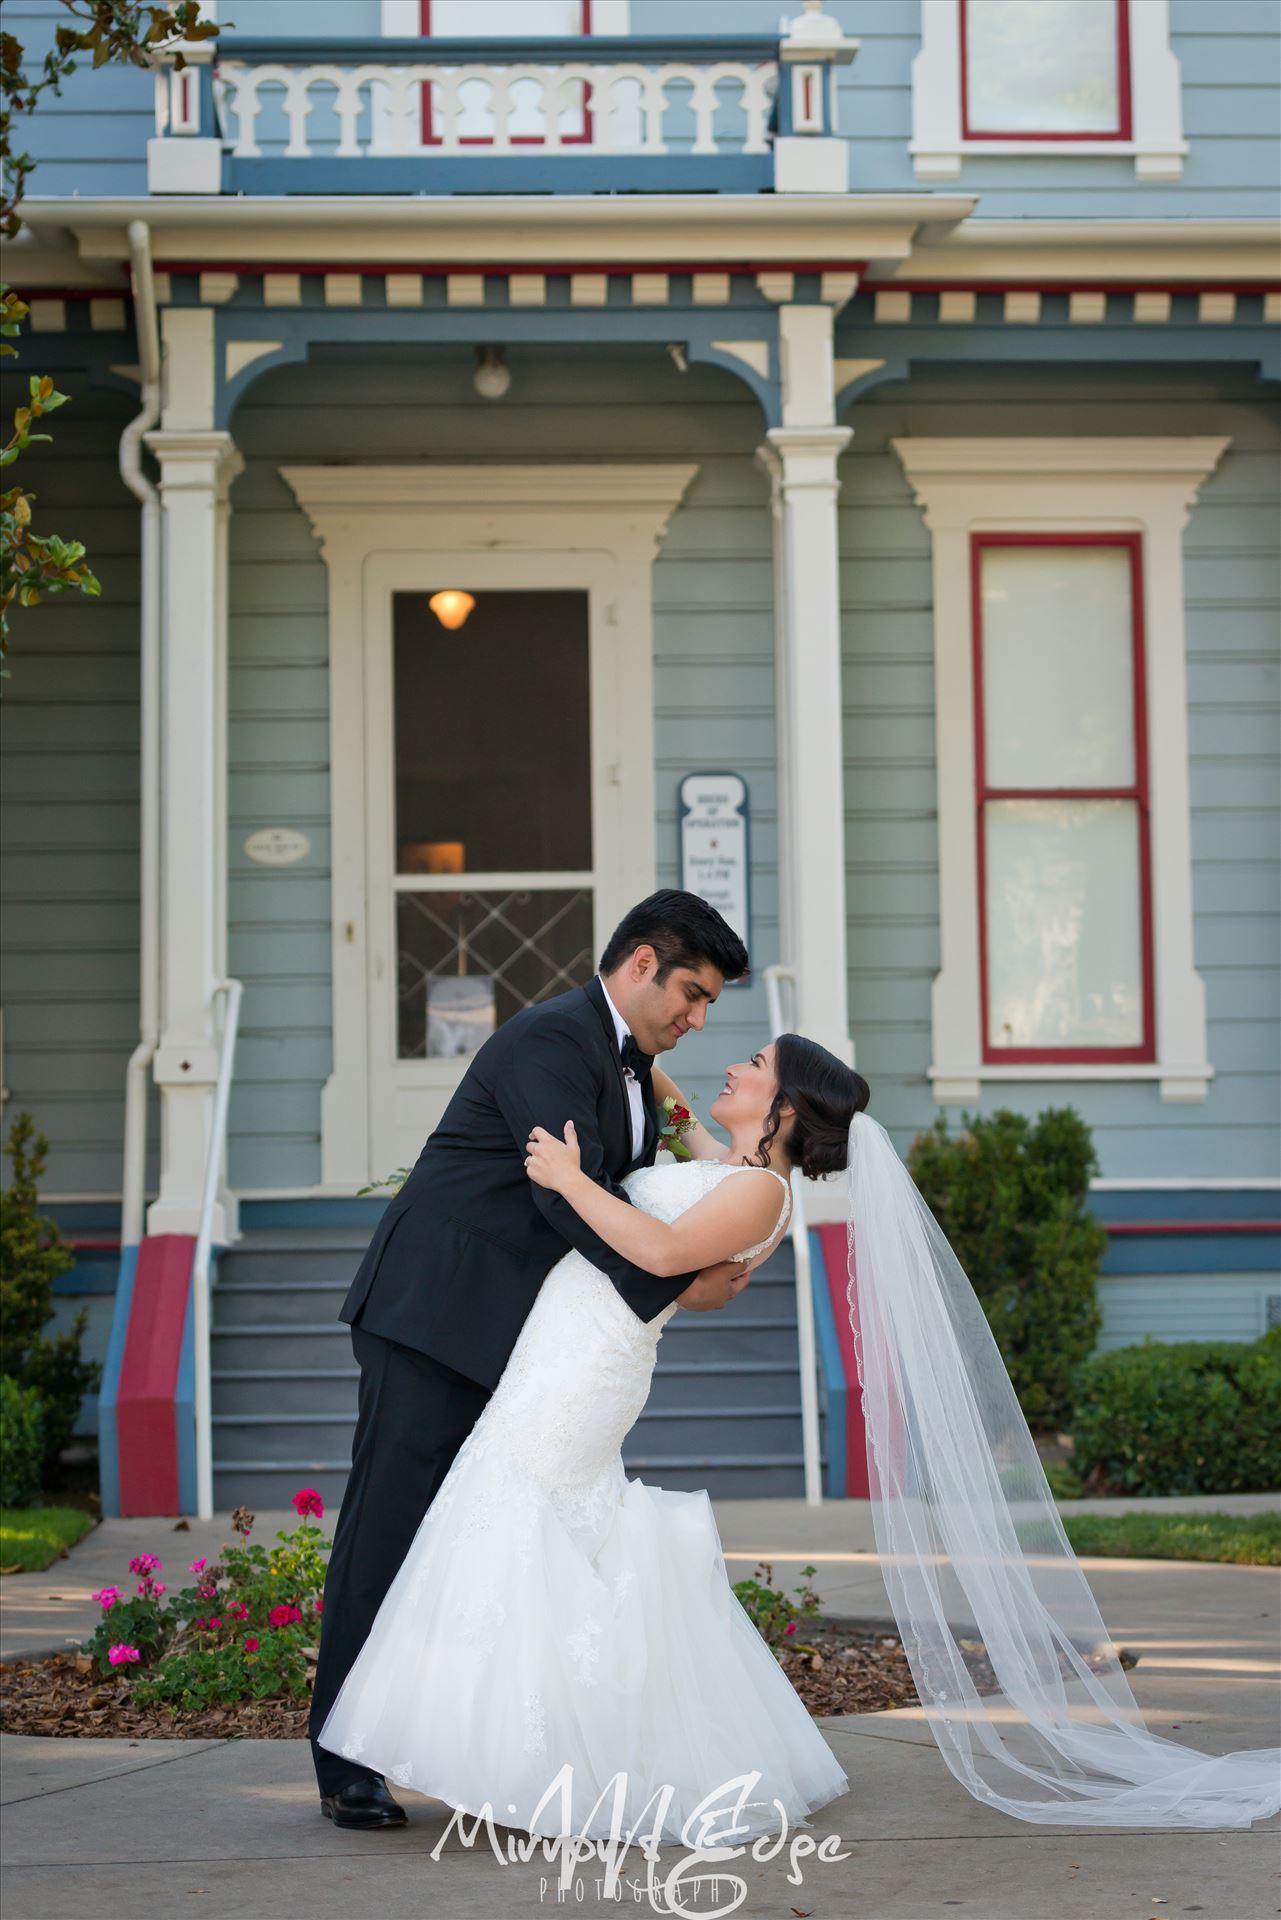 Port-9615.jpg Modern and chic Downtown San Luis Obispo Wedding at the Historic Jack House and Gardens, wedding photography with love by Sarah Williams